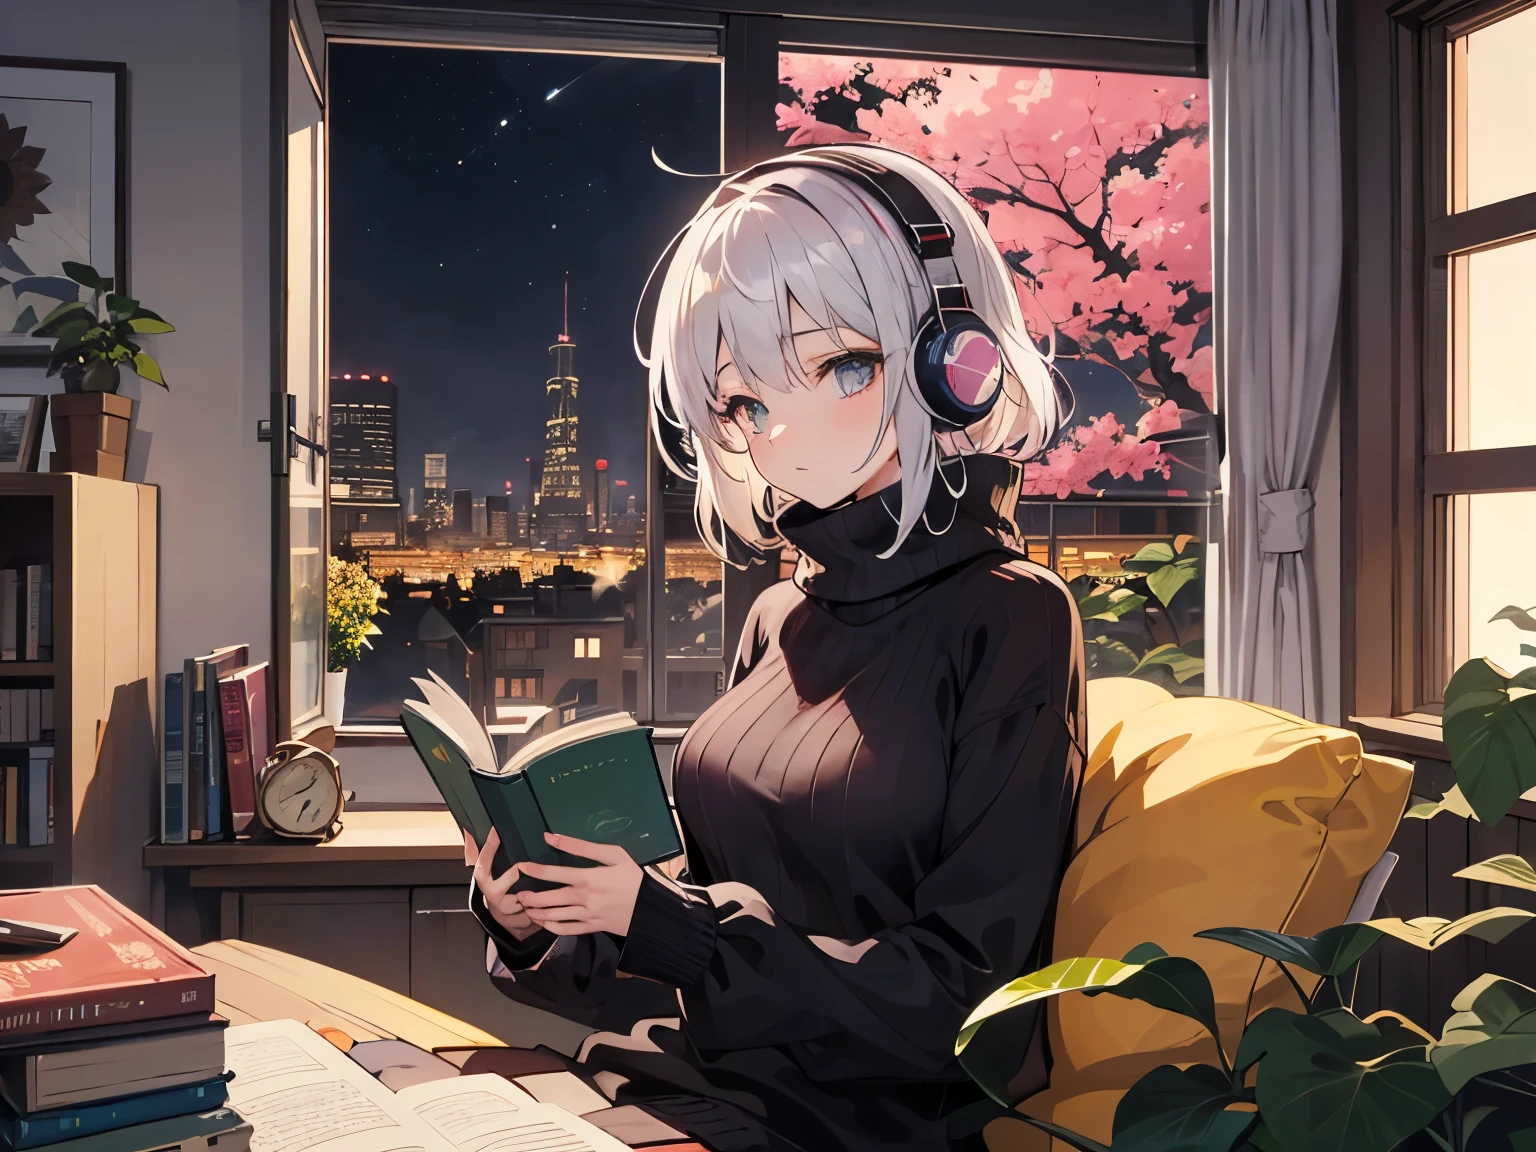 A detailed anime girl, wearing a large sweater, wearing headband headphones, lofi, tranquil, quiet vibes, chilling, in her living room reading, A large window with a view over the city, city skyline visible outside, quiet night, cat, masterpiece, best quality, big sunflowers, ficus, bougainvillea, flowers, books